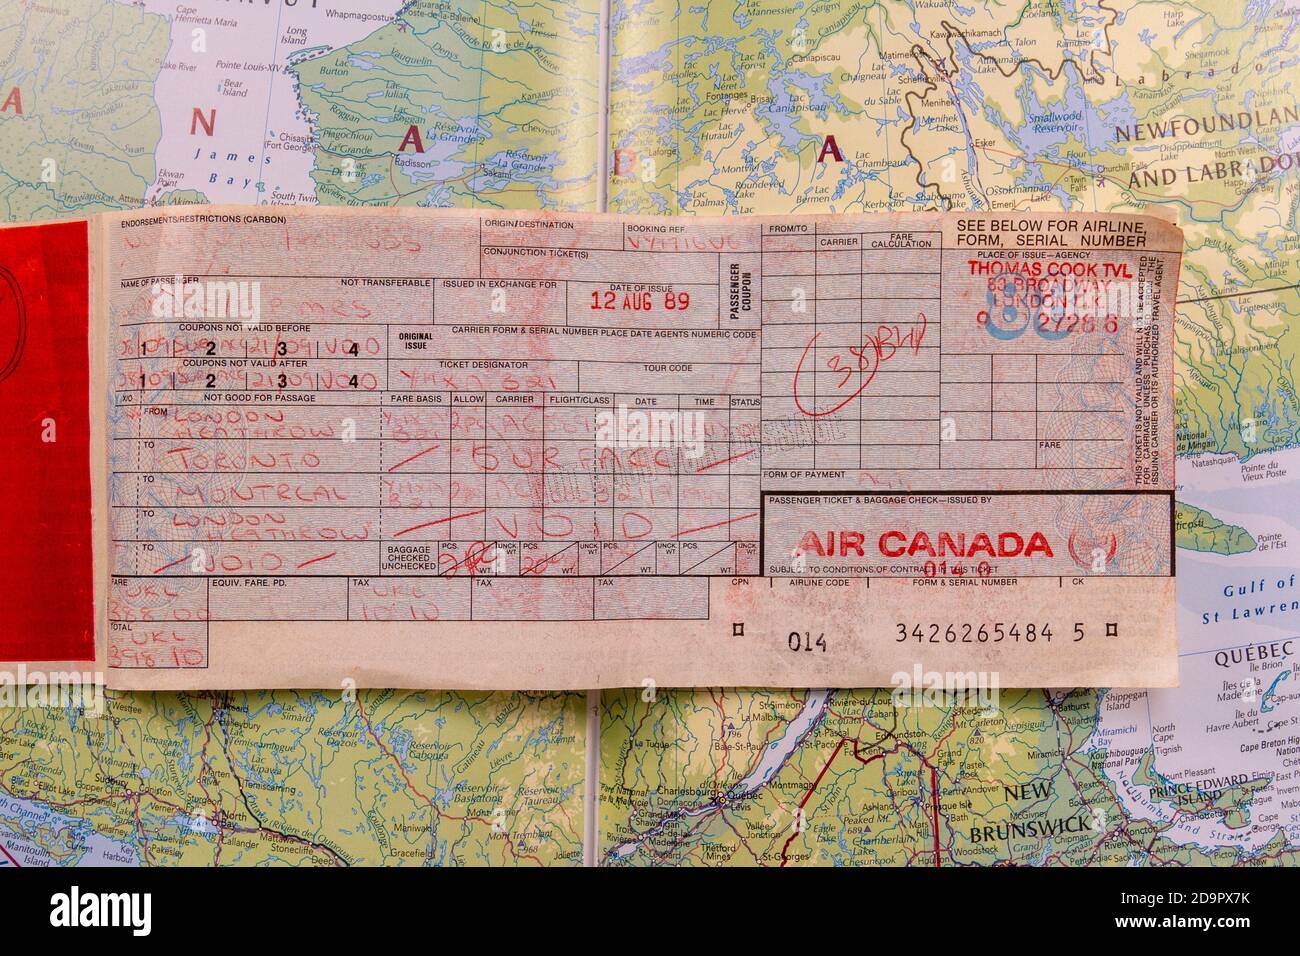 A hand written IATA plane ticket issued by Thomas Cook Travel from 1989 (for flights between the UK and Canada) on a map of Canada. Stock Photo